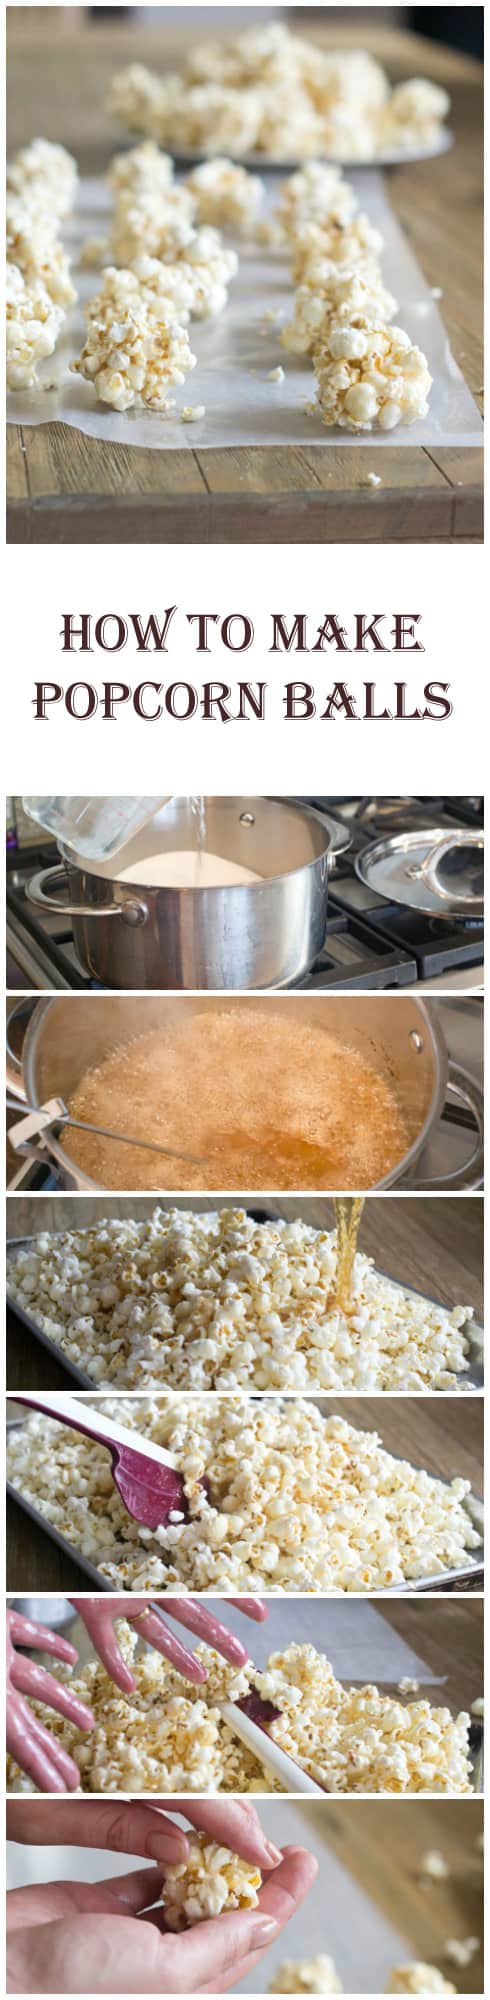 How To Make Traditional Popcorn Balls